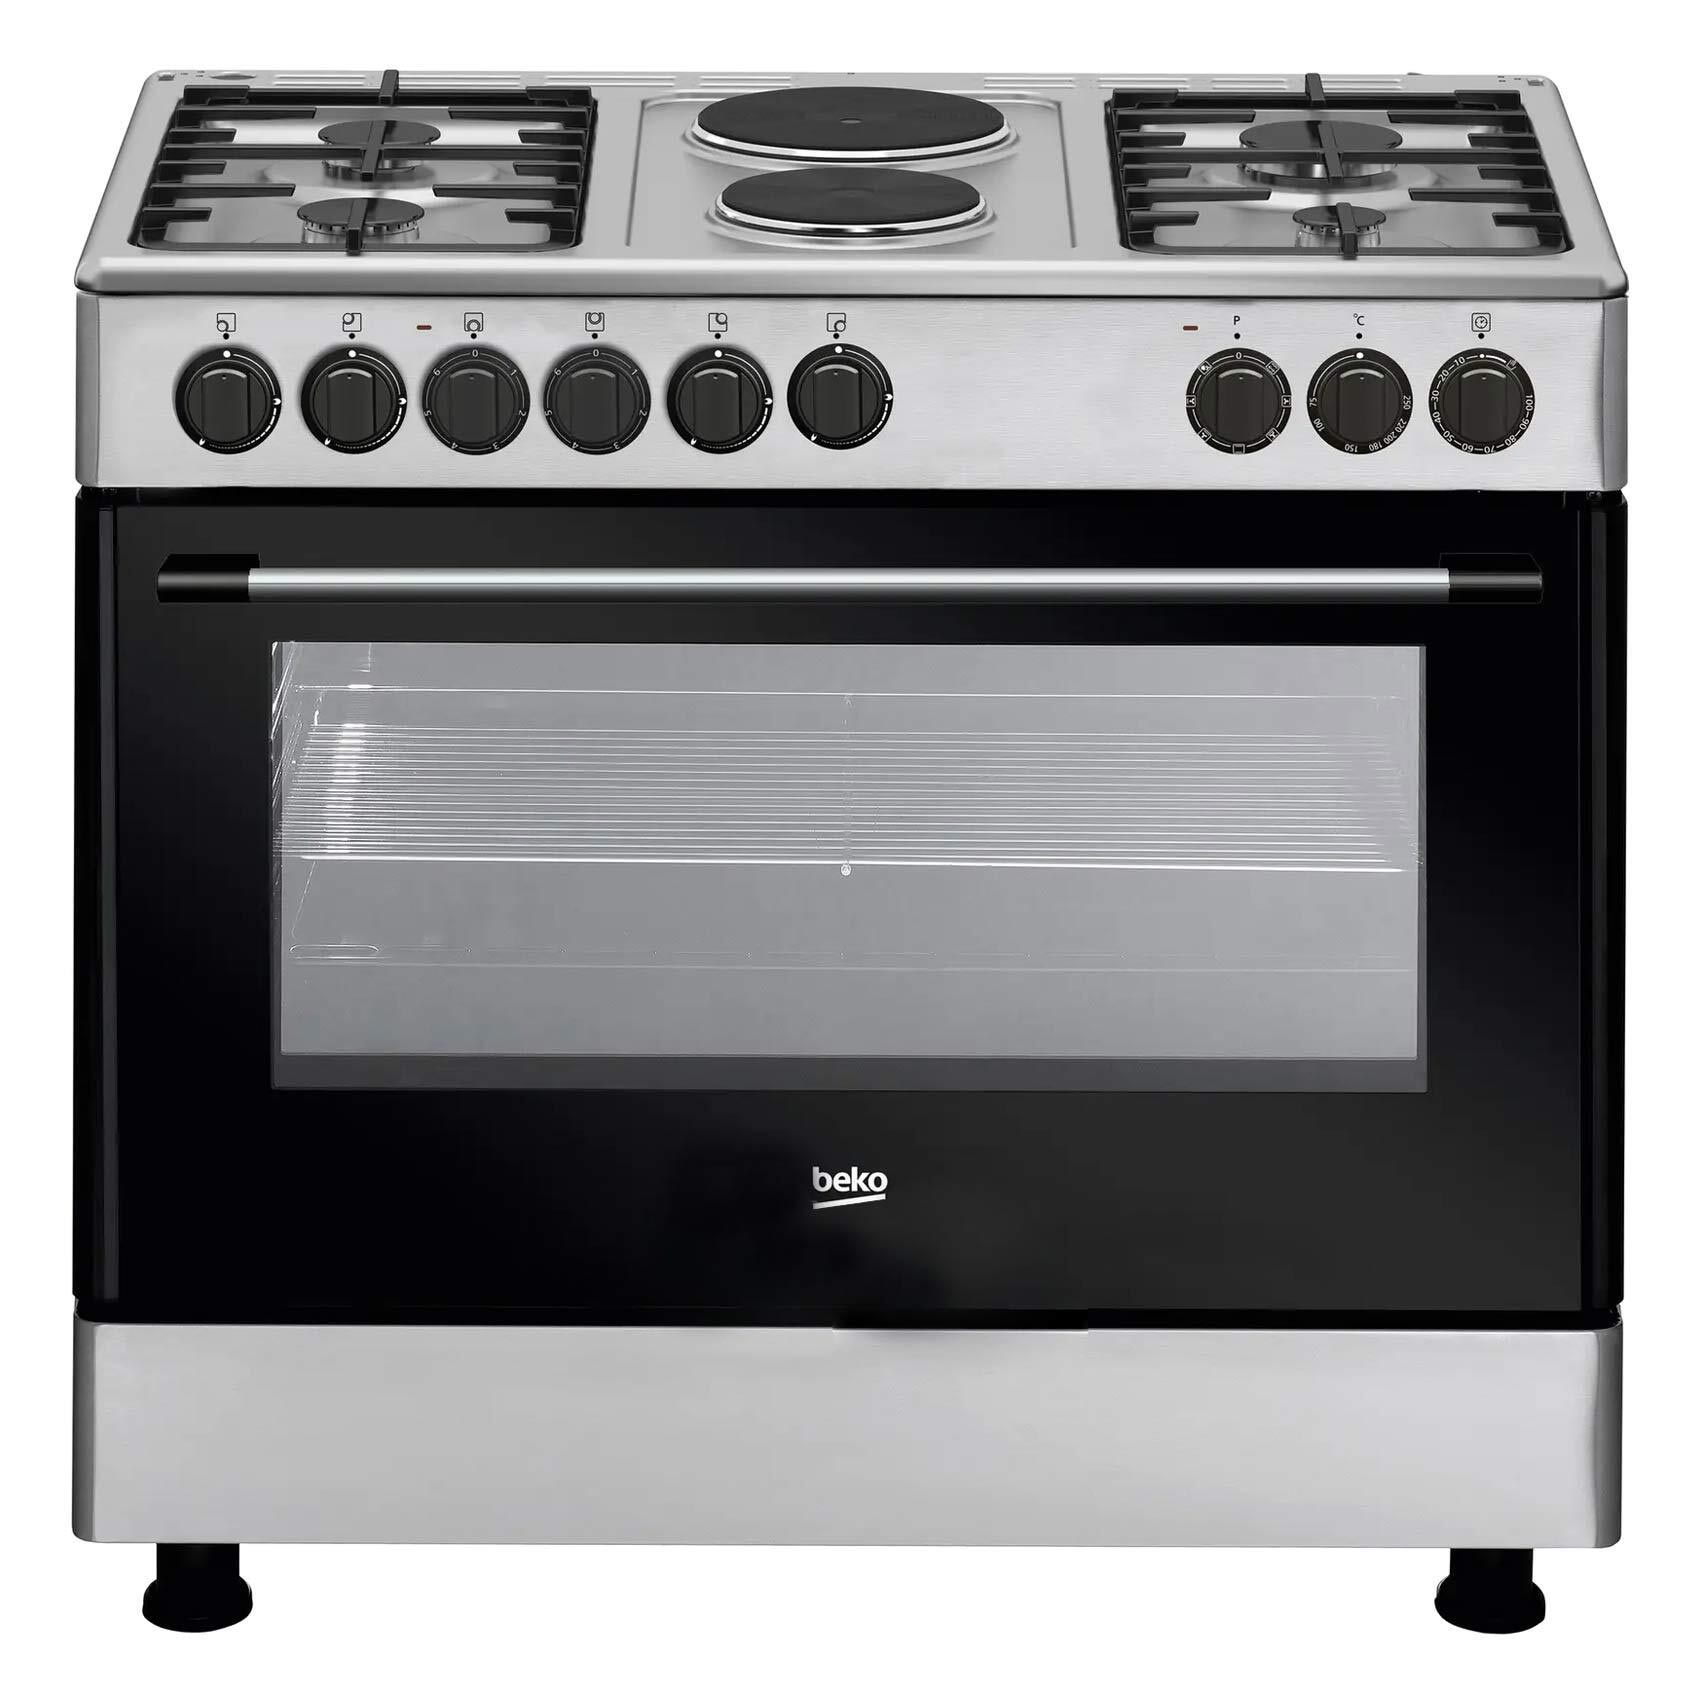 Beko GE 12121 DX 4+2 Gas With Electric Cooker Silver And Black